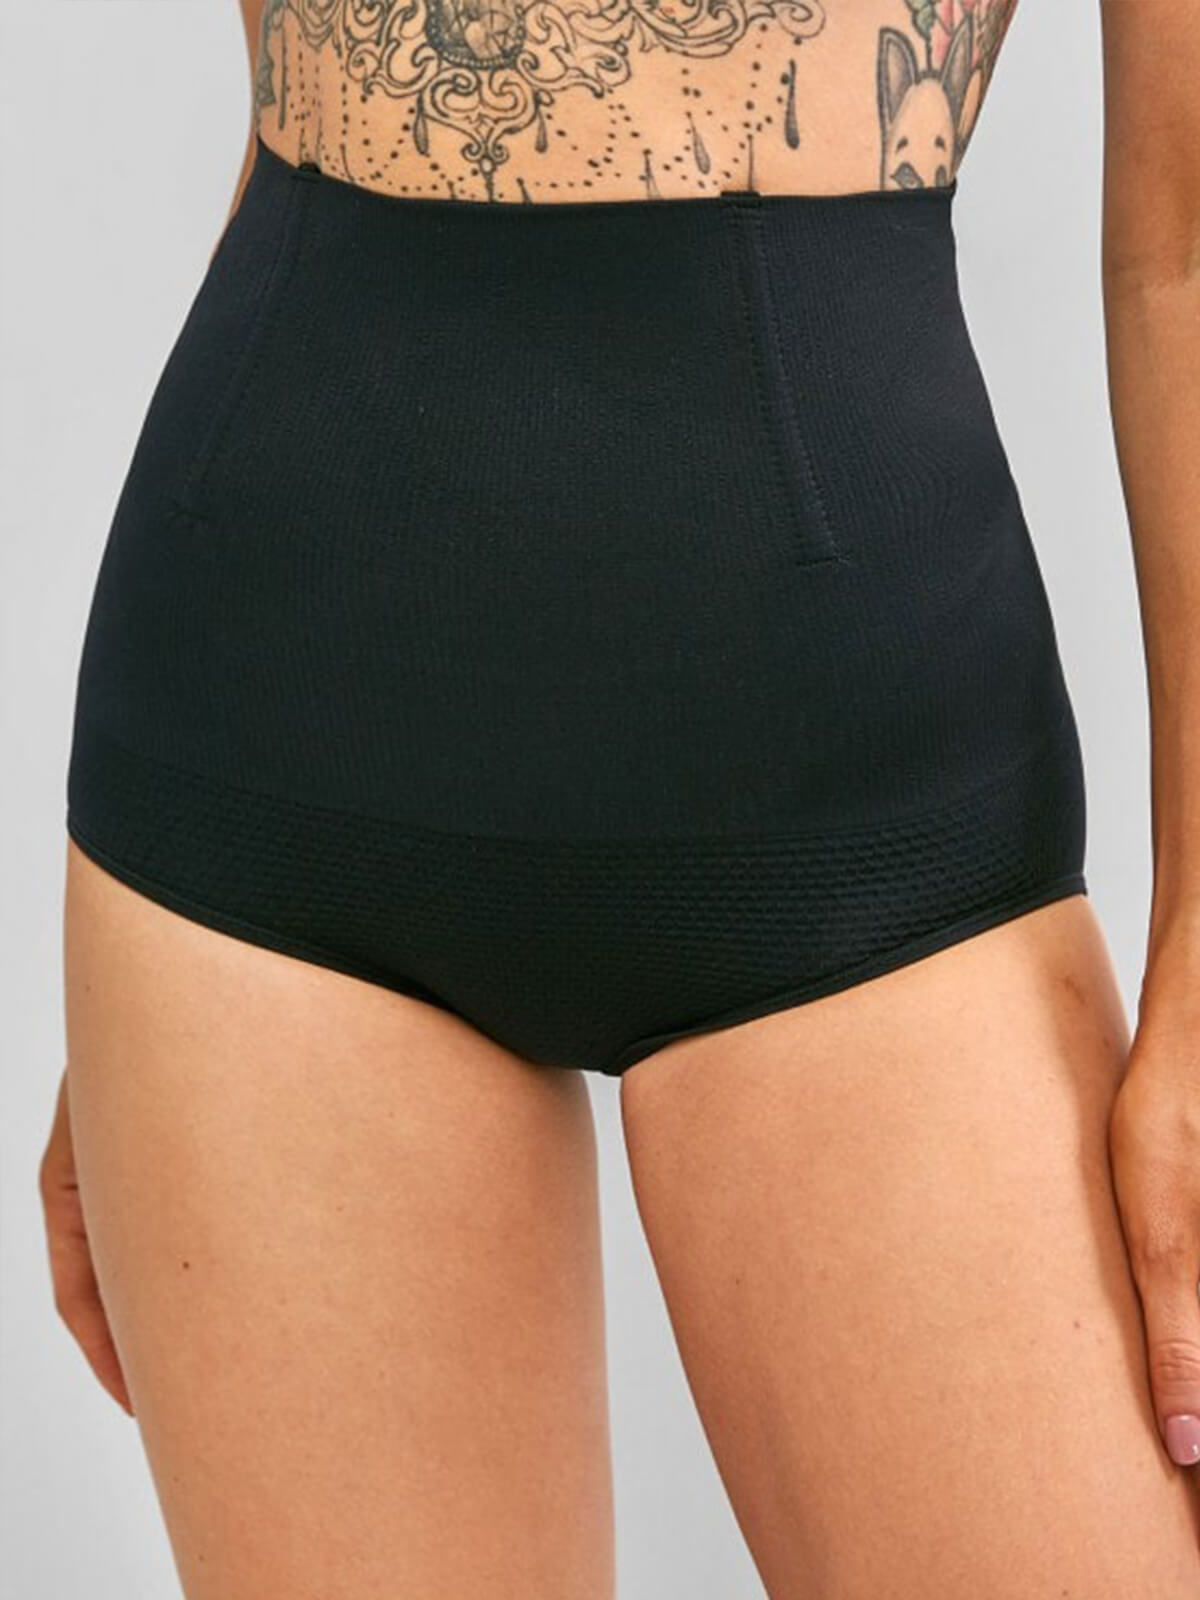 Womens High Waist Panty With Tummy Tucker Panties For Postpartum Recovery  And Hip Support From Tie06, $8.31